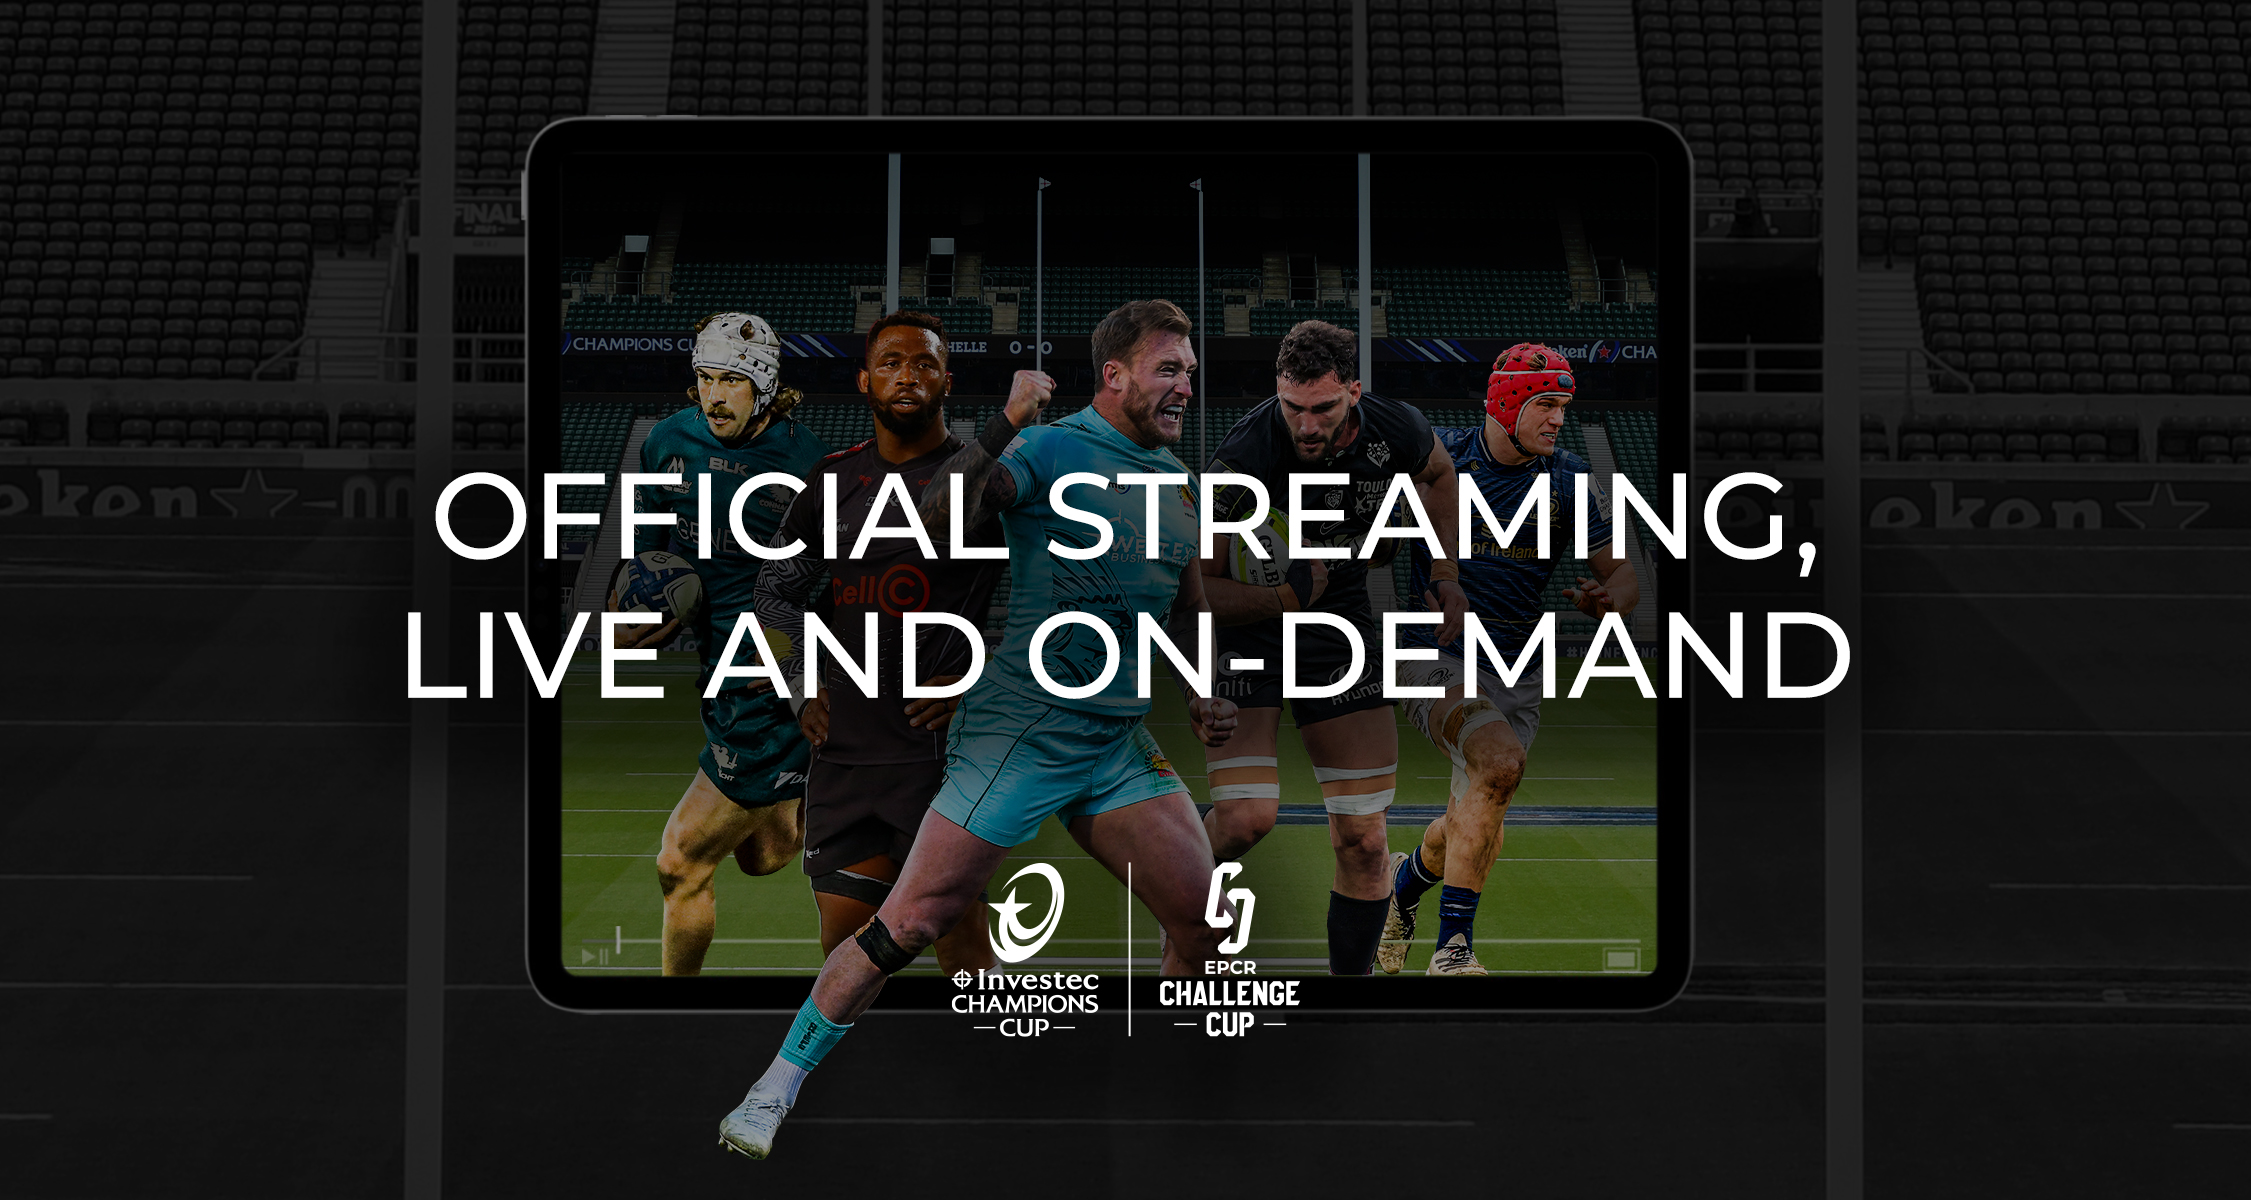 Investec Champions Cup and EPCR Challenge Cup Live streaming